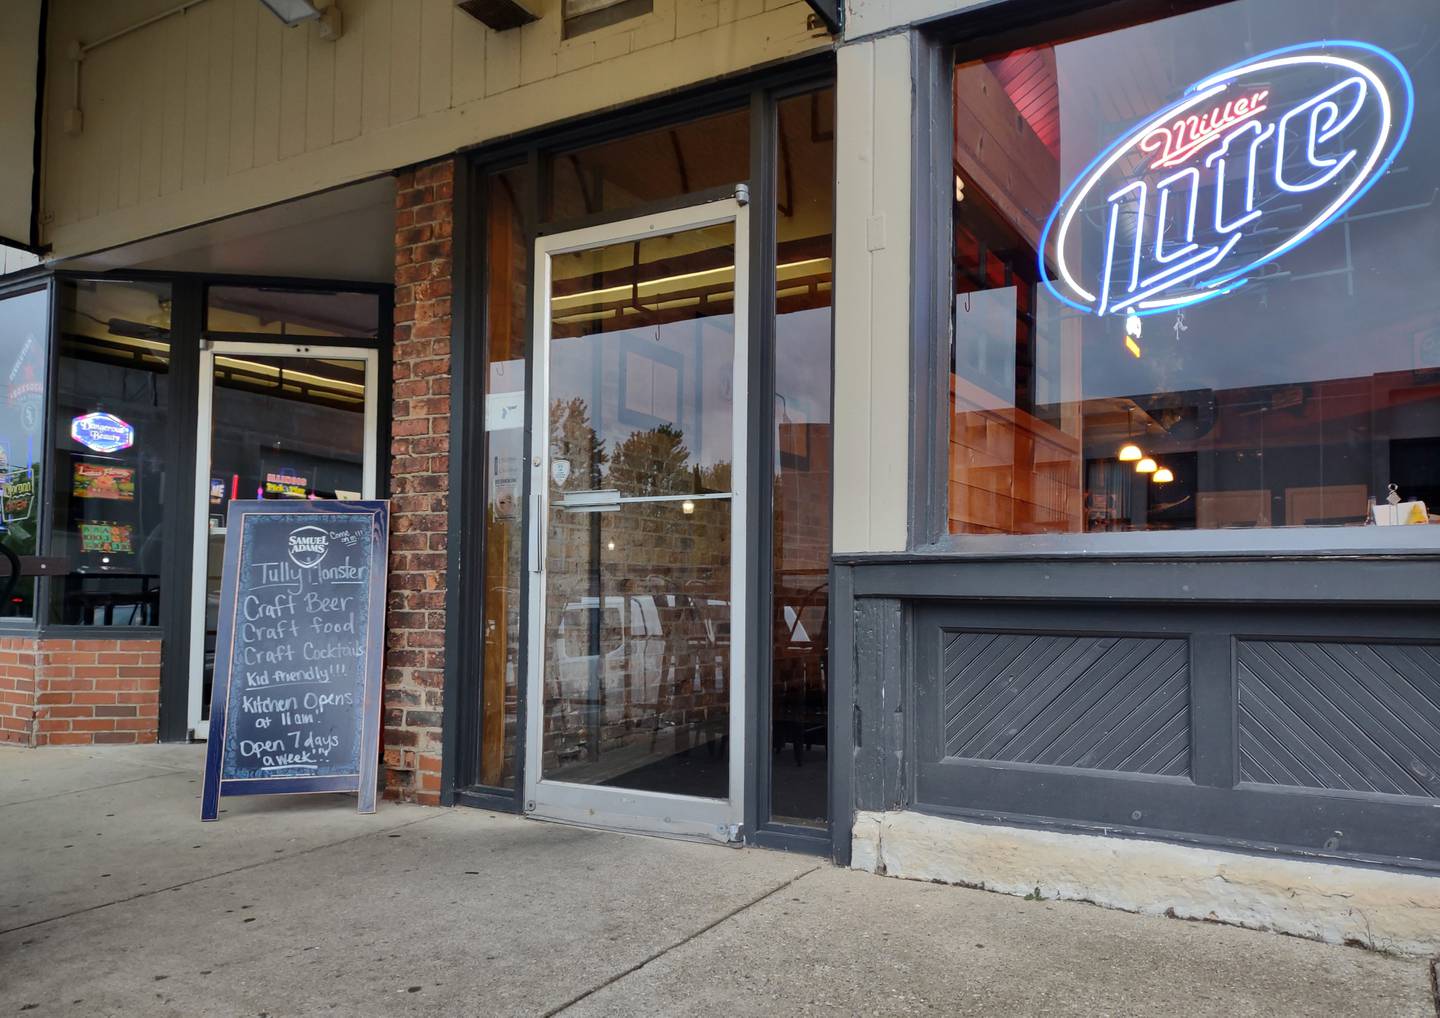 The A-frame chalkboard sign marks the entrance of Tully Monster Pub & Grill on the west side of Liberty Street in downtown Morris.